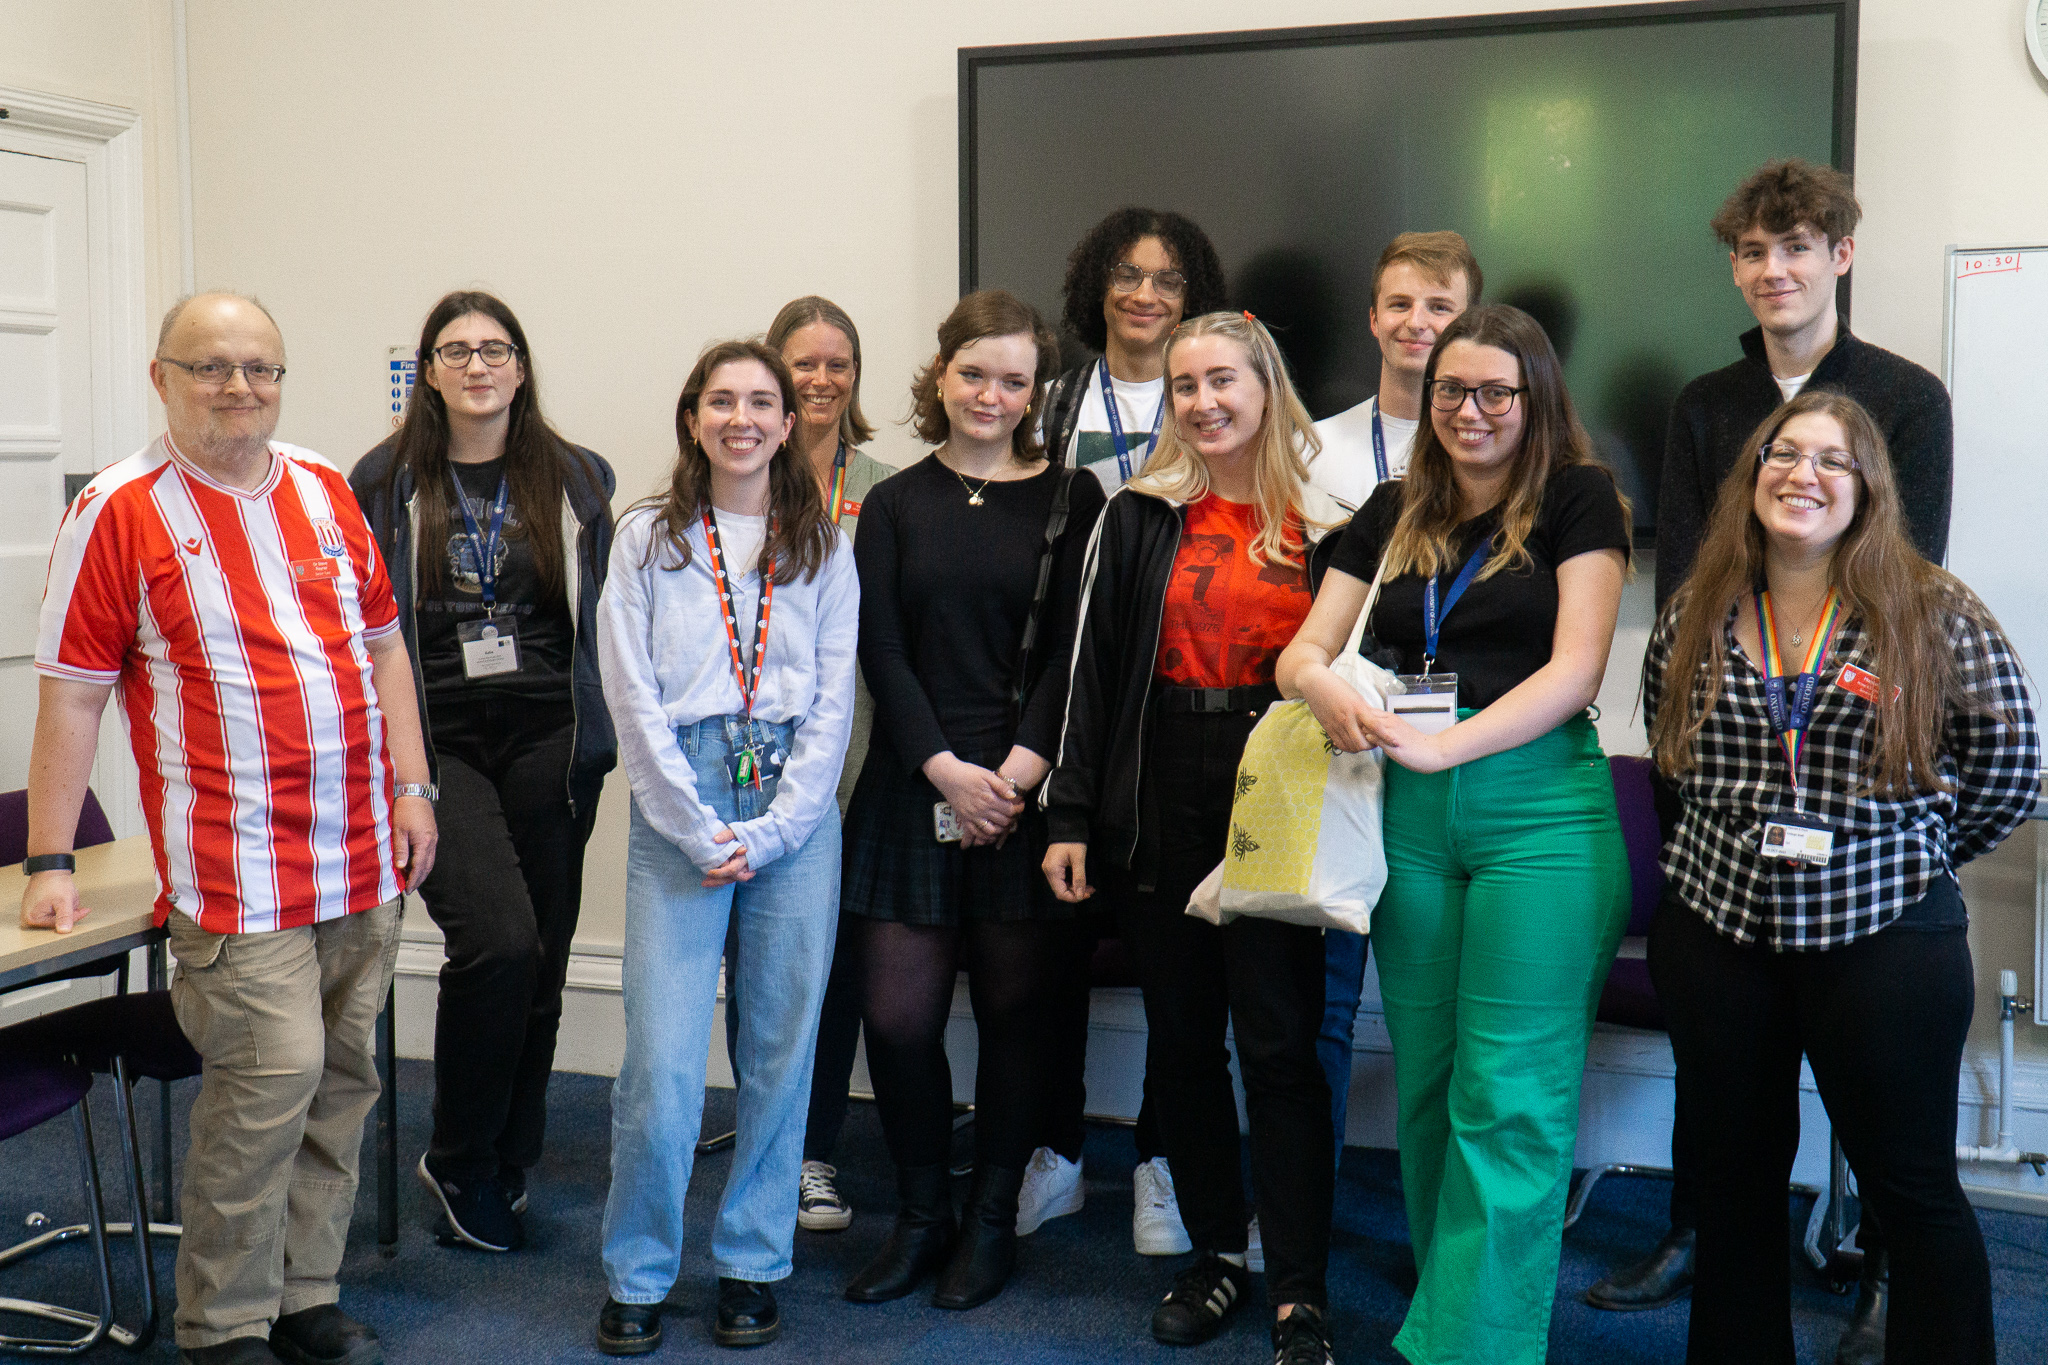 We welcomed our first Opportunity Oxford students this year. The scheme helps to bridge the gap between school and university for those from disadvantaged backgrounds with a summer course.